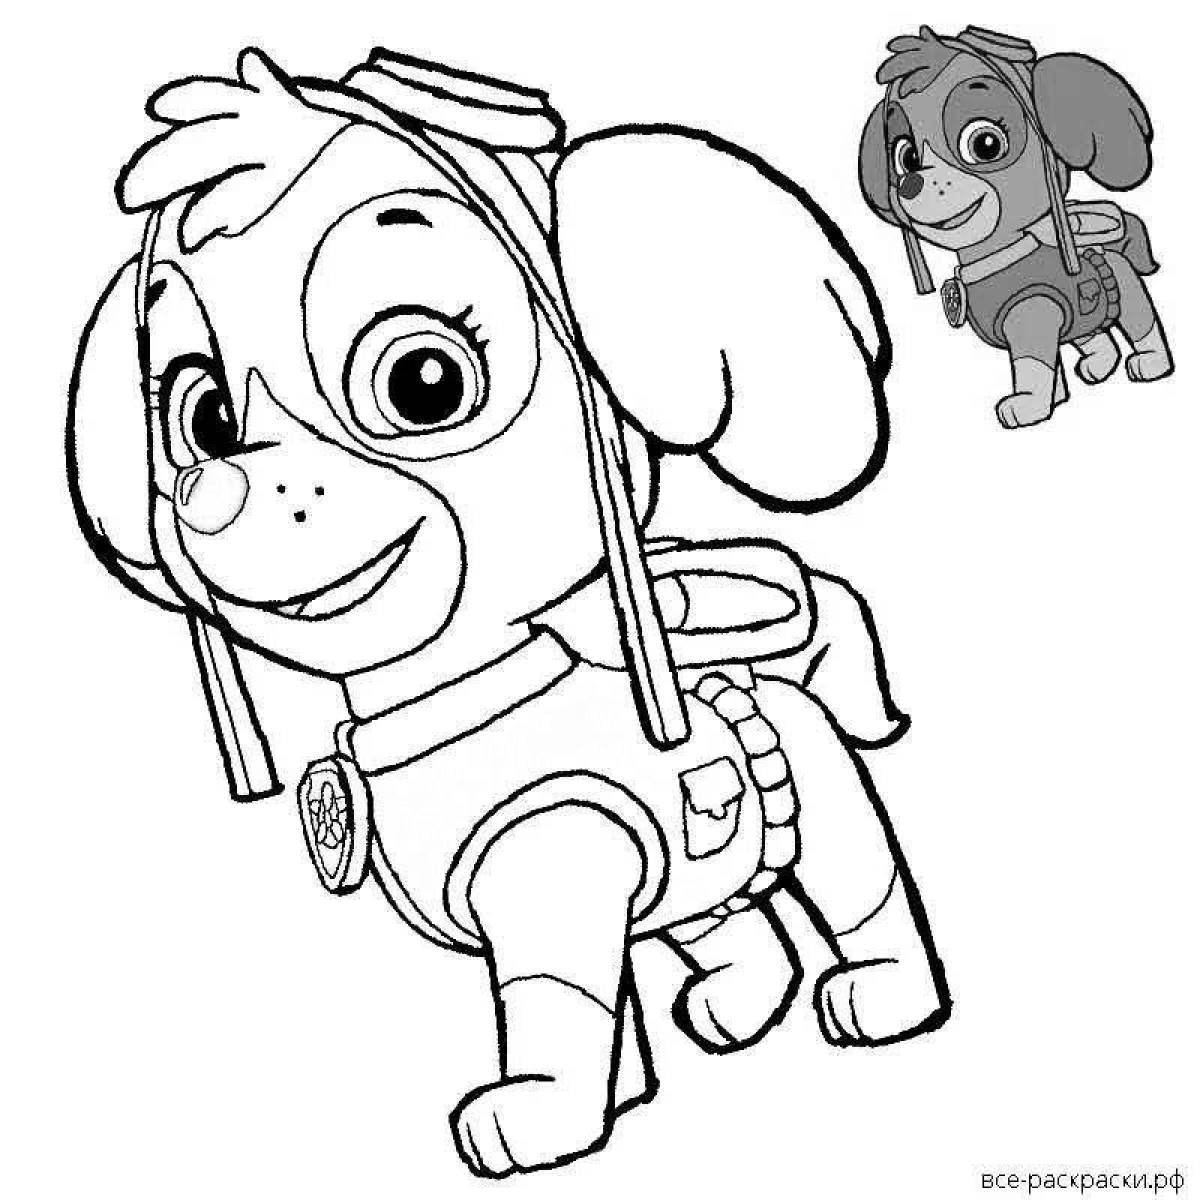 Adorable Skye puppy coloring page